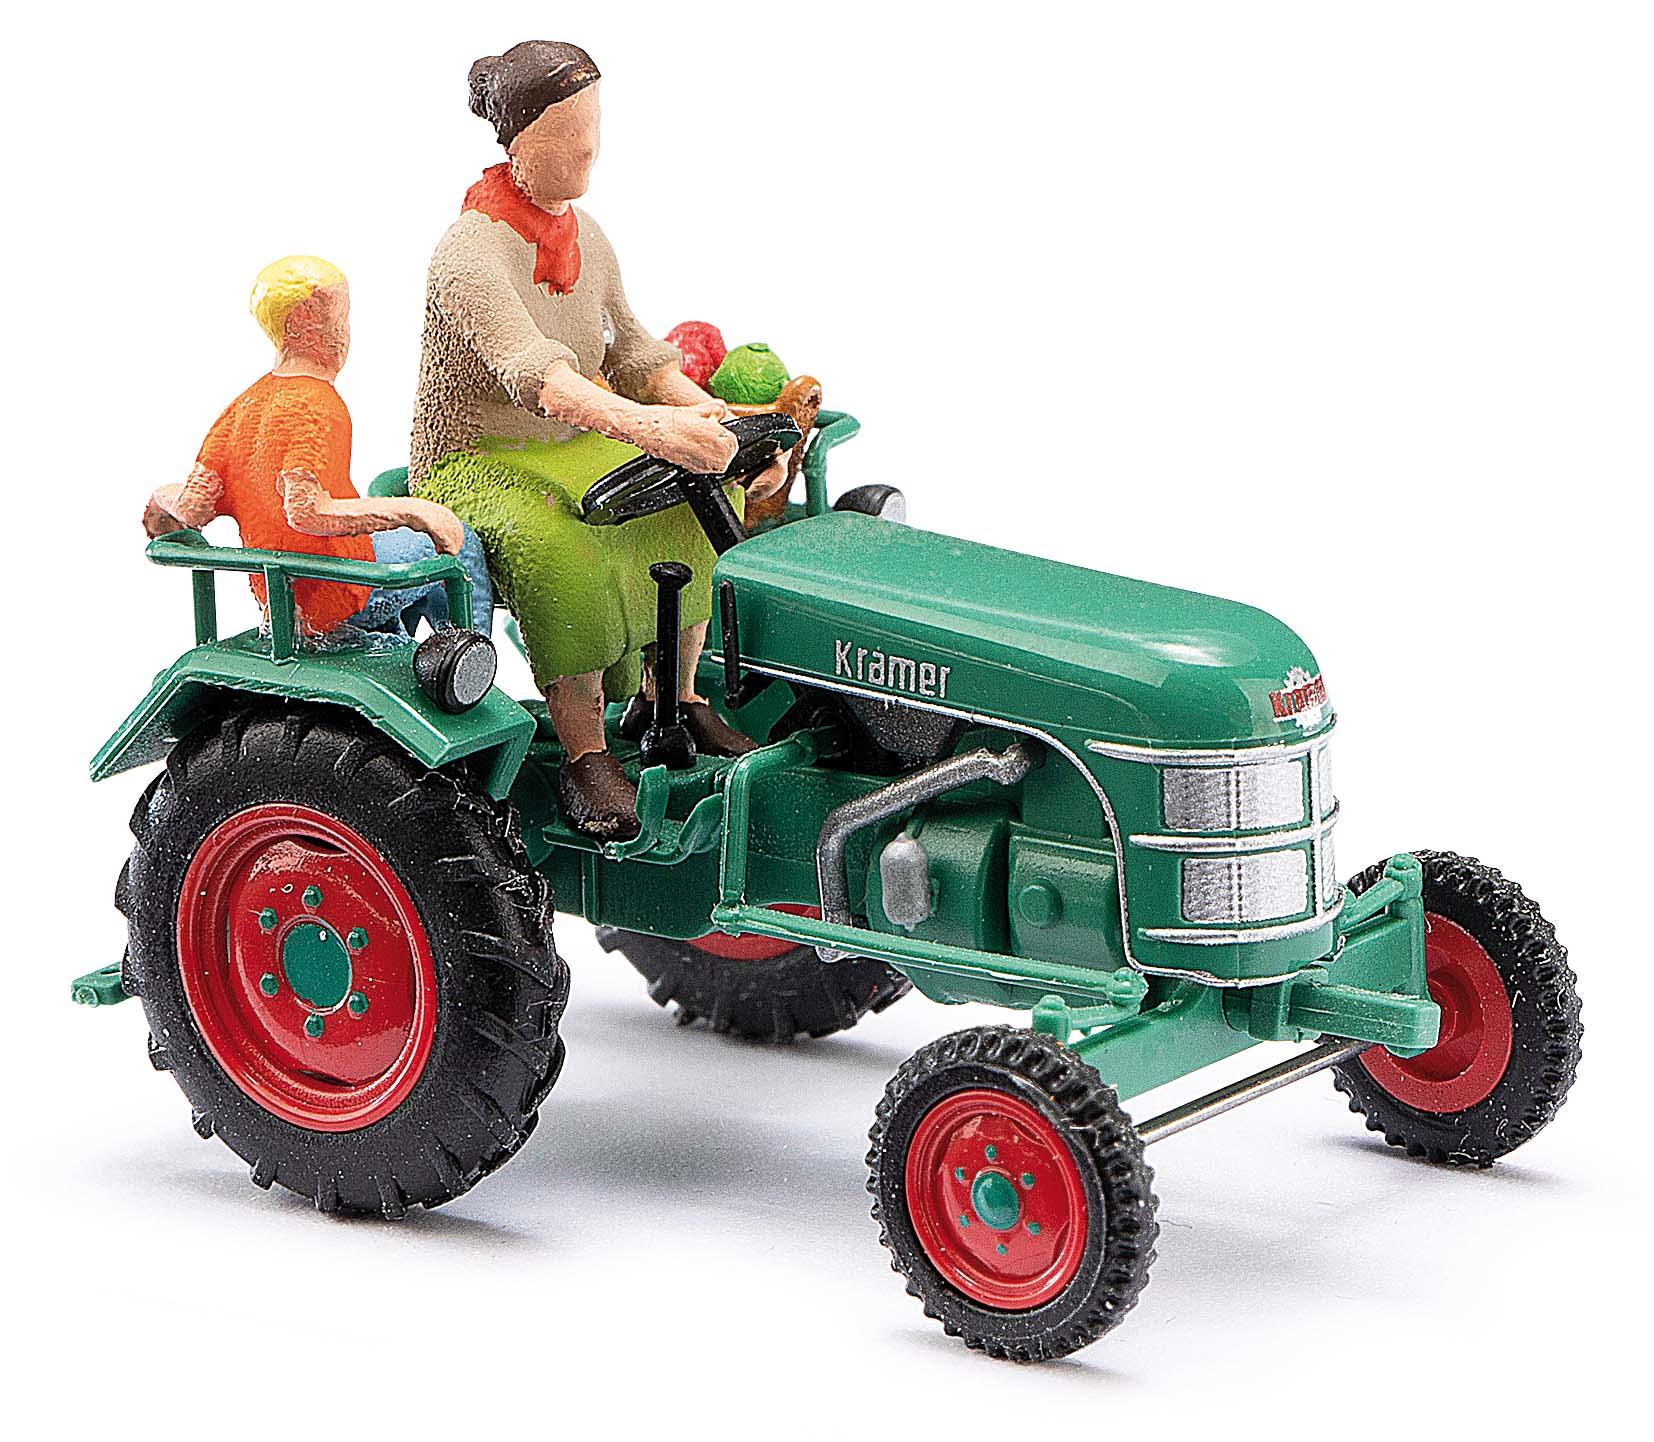 Busch 40071 Tractor Kramer KL11 with farmer and child